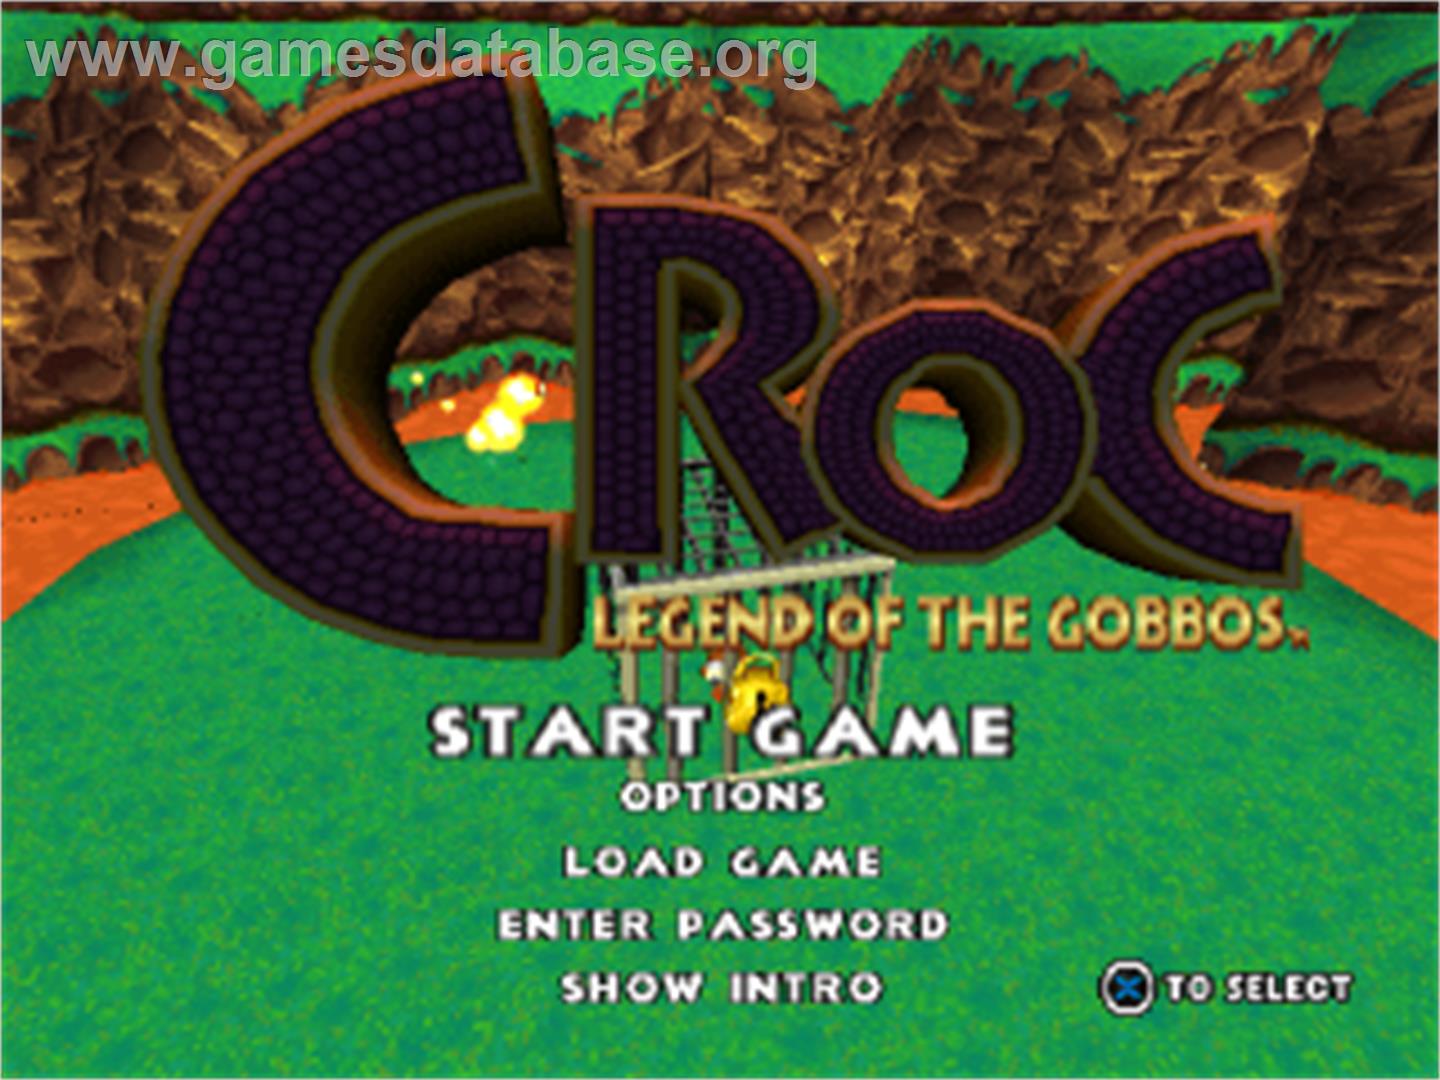 Croc: Legend of the Gobbos - Sony Playstation - Artwork - Title Screen